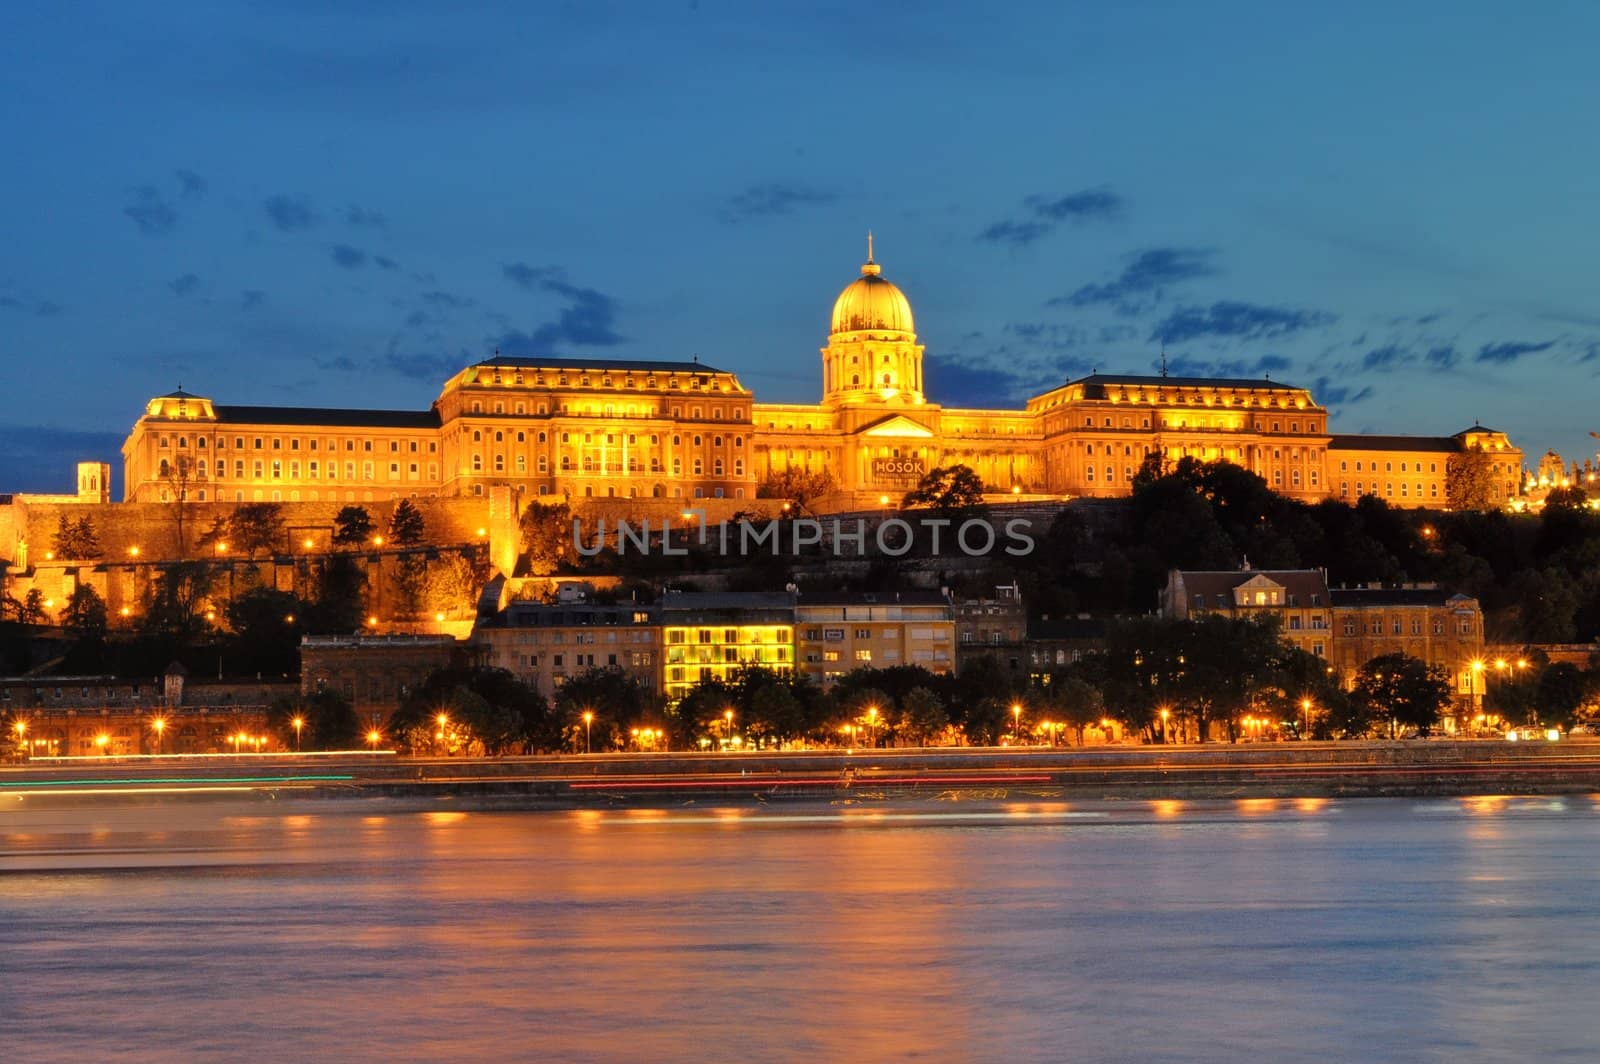 Castle of Budapest by anderm